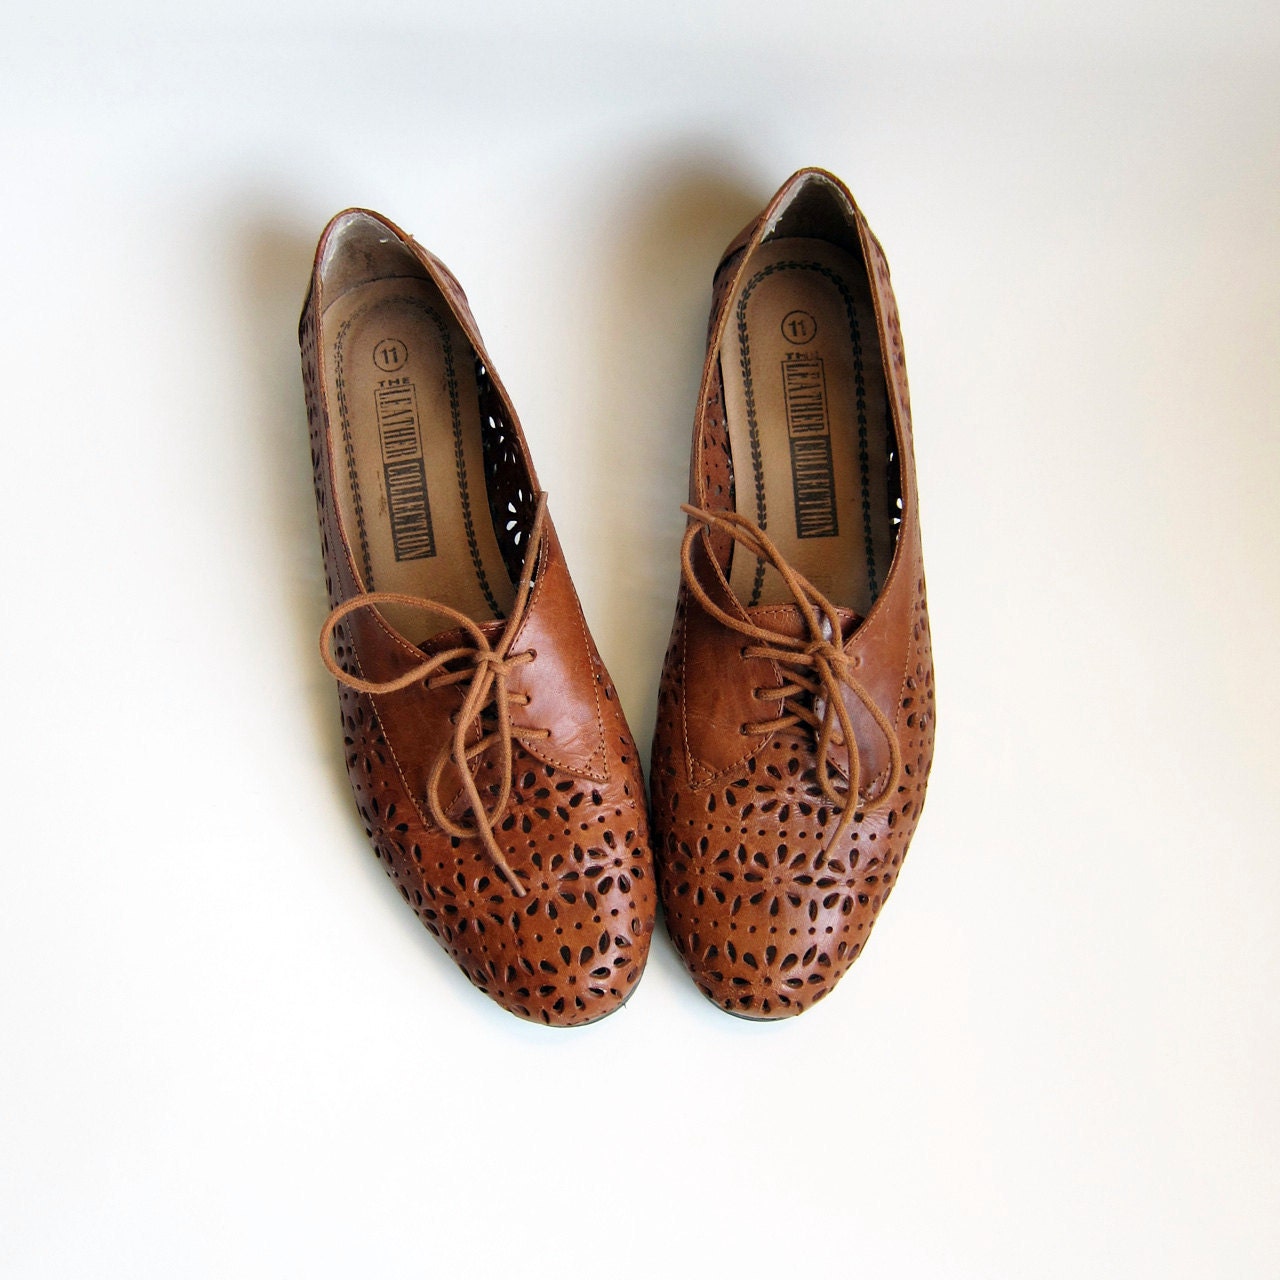 Vintage 1980s Shoes / Cut Out Perforated Brown by simplevintage